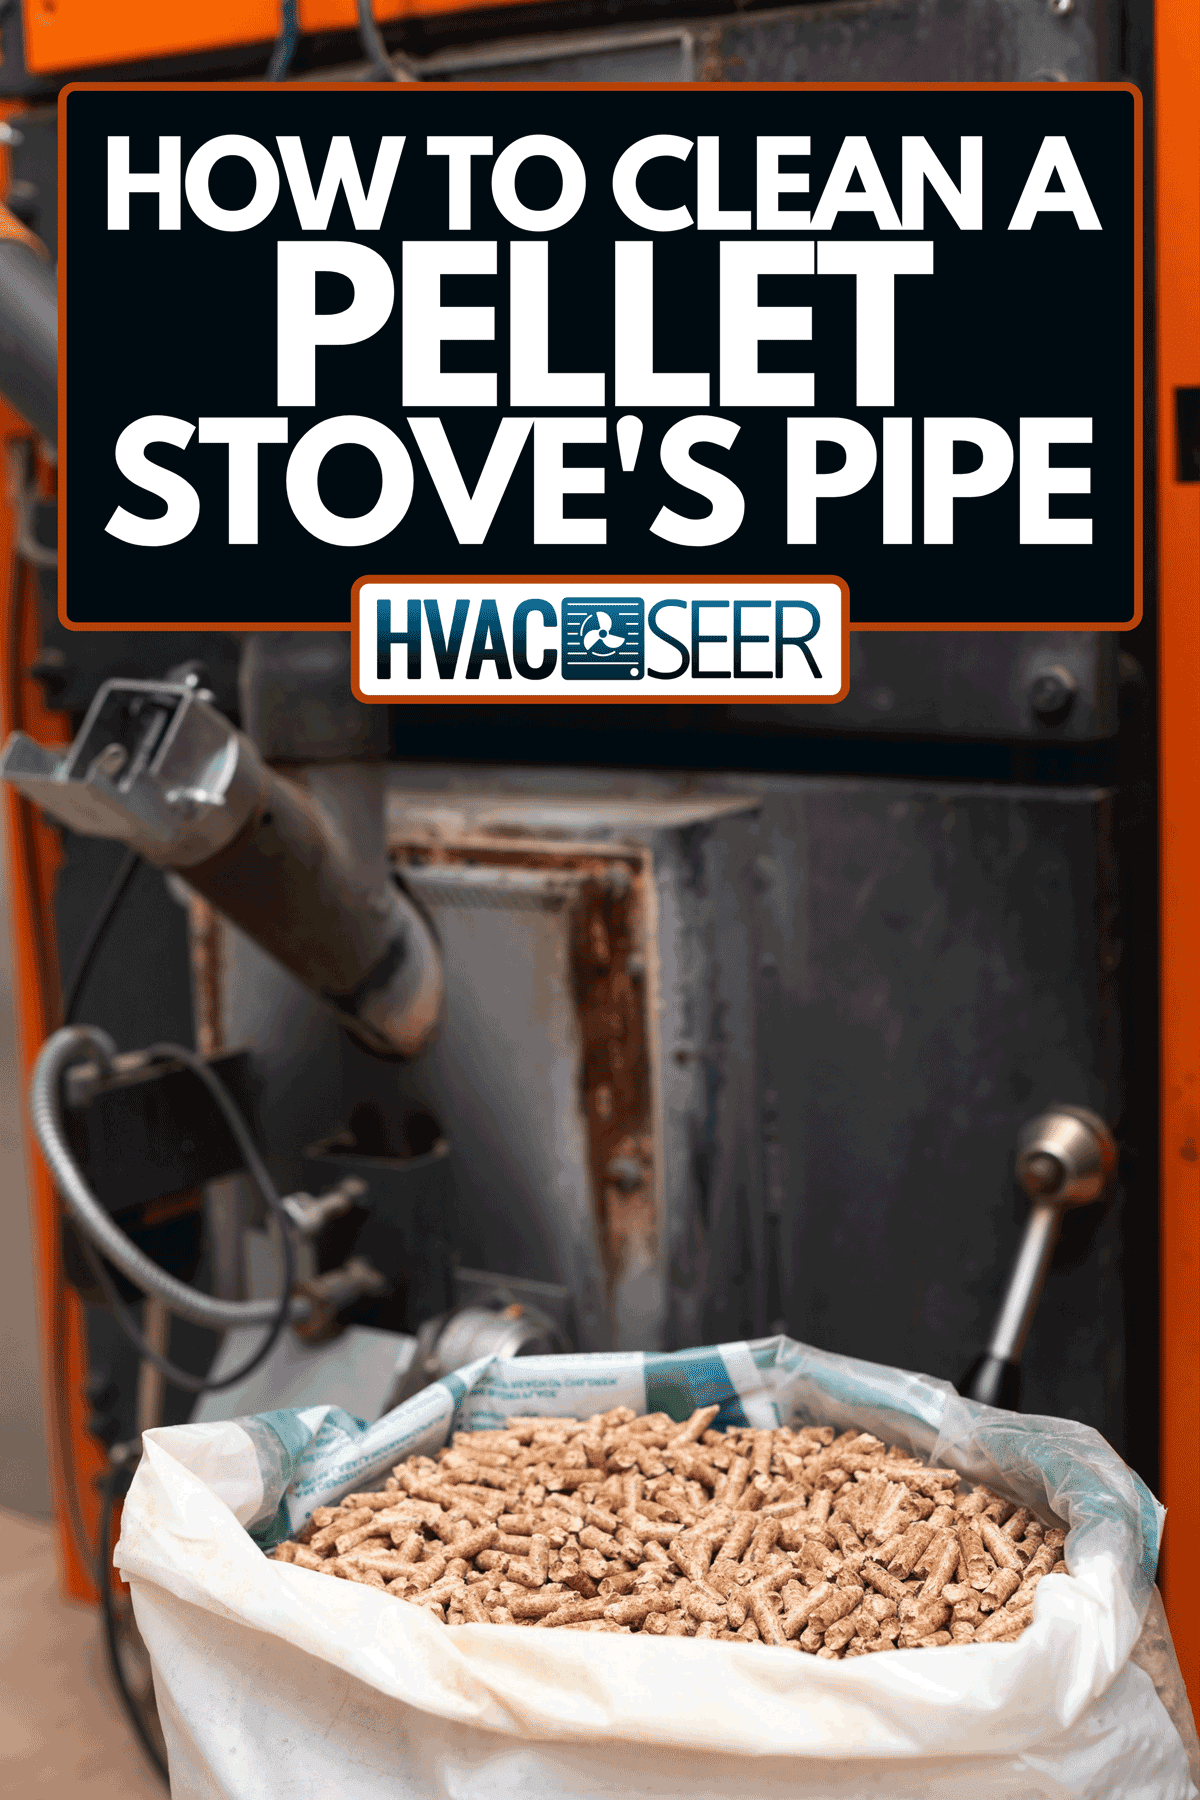 An automatic pellet burner system, How To Clean A Pellet Stove's Pipe